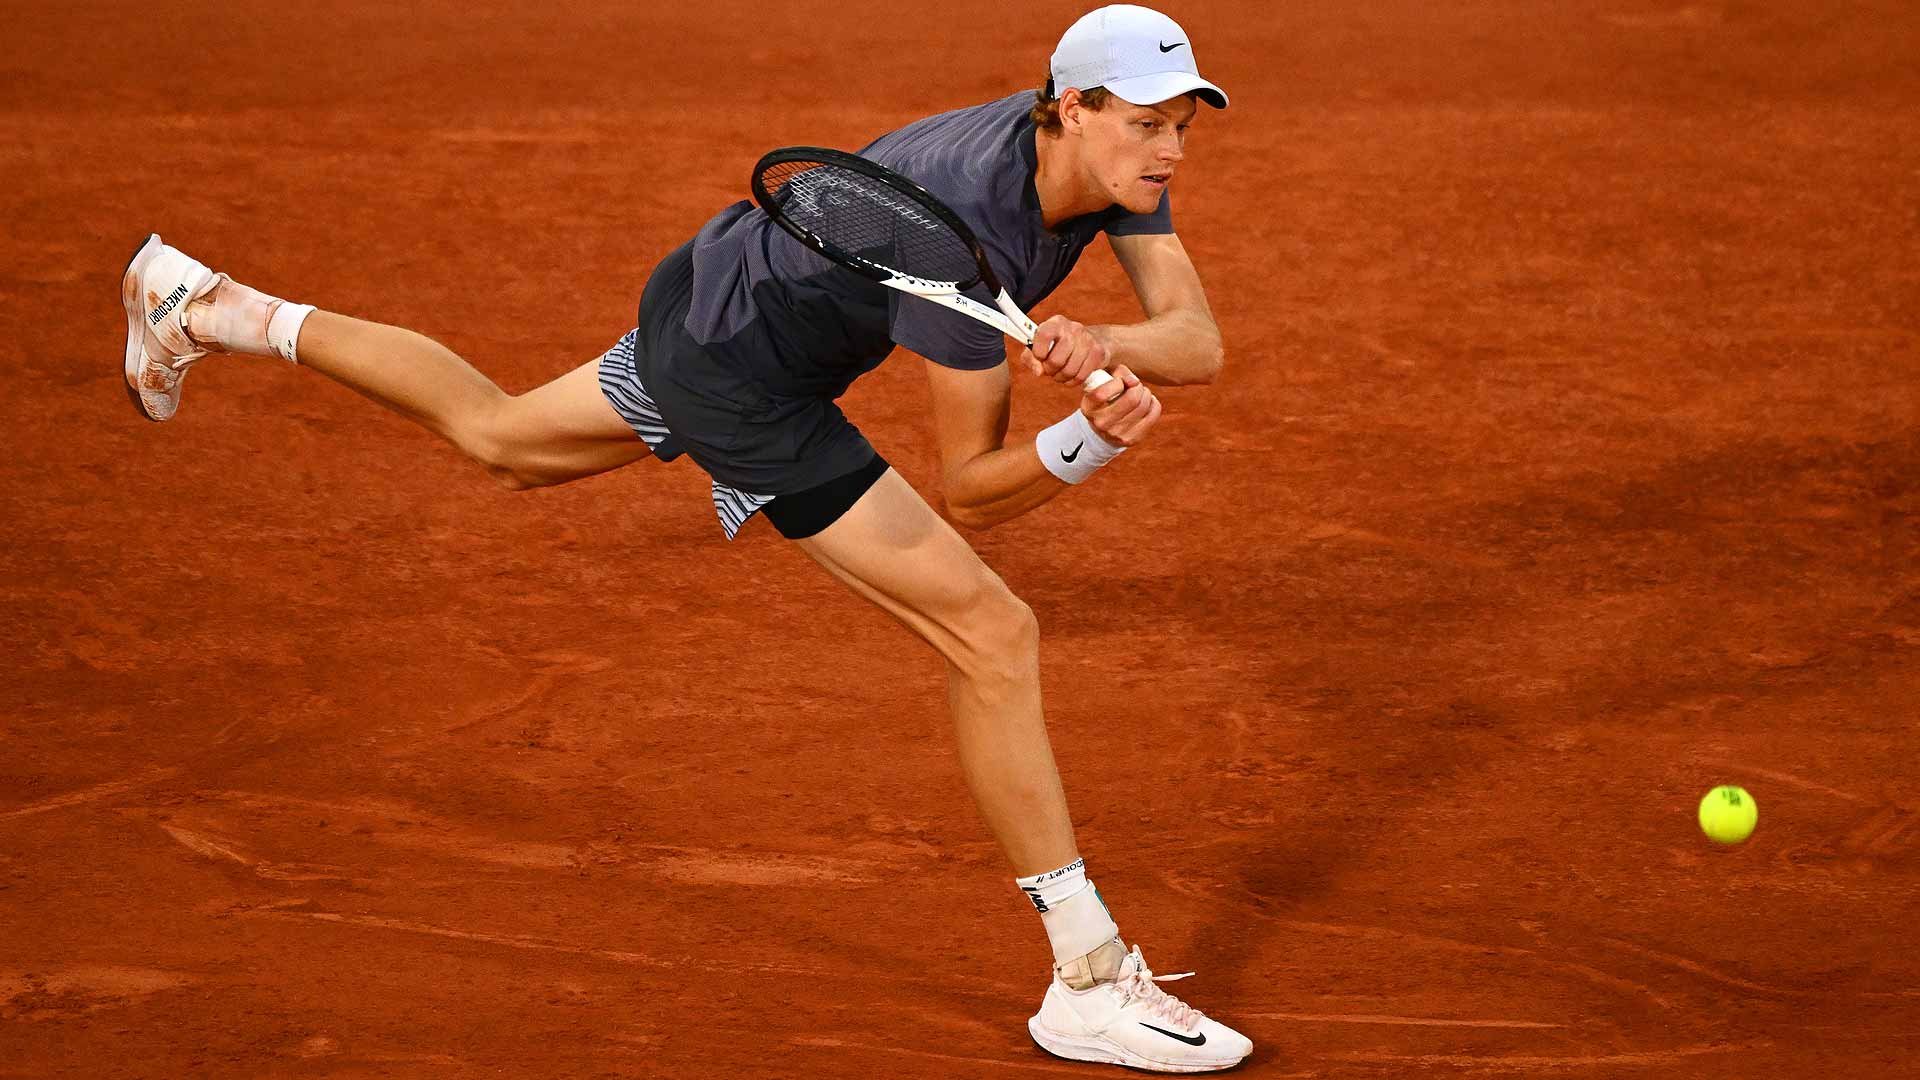 Jannik Sinner defeats Alexandre Muller in straight sets on Monday to reach the second round at Roland Garros.